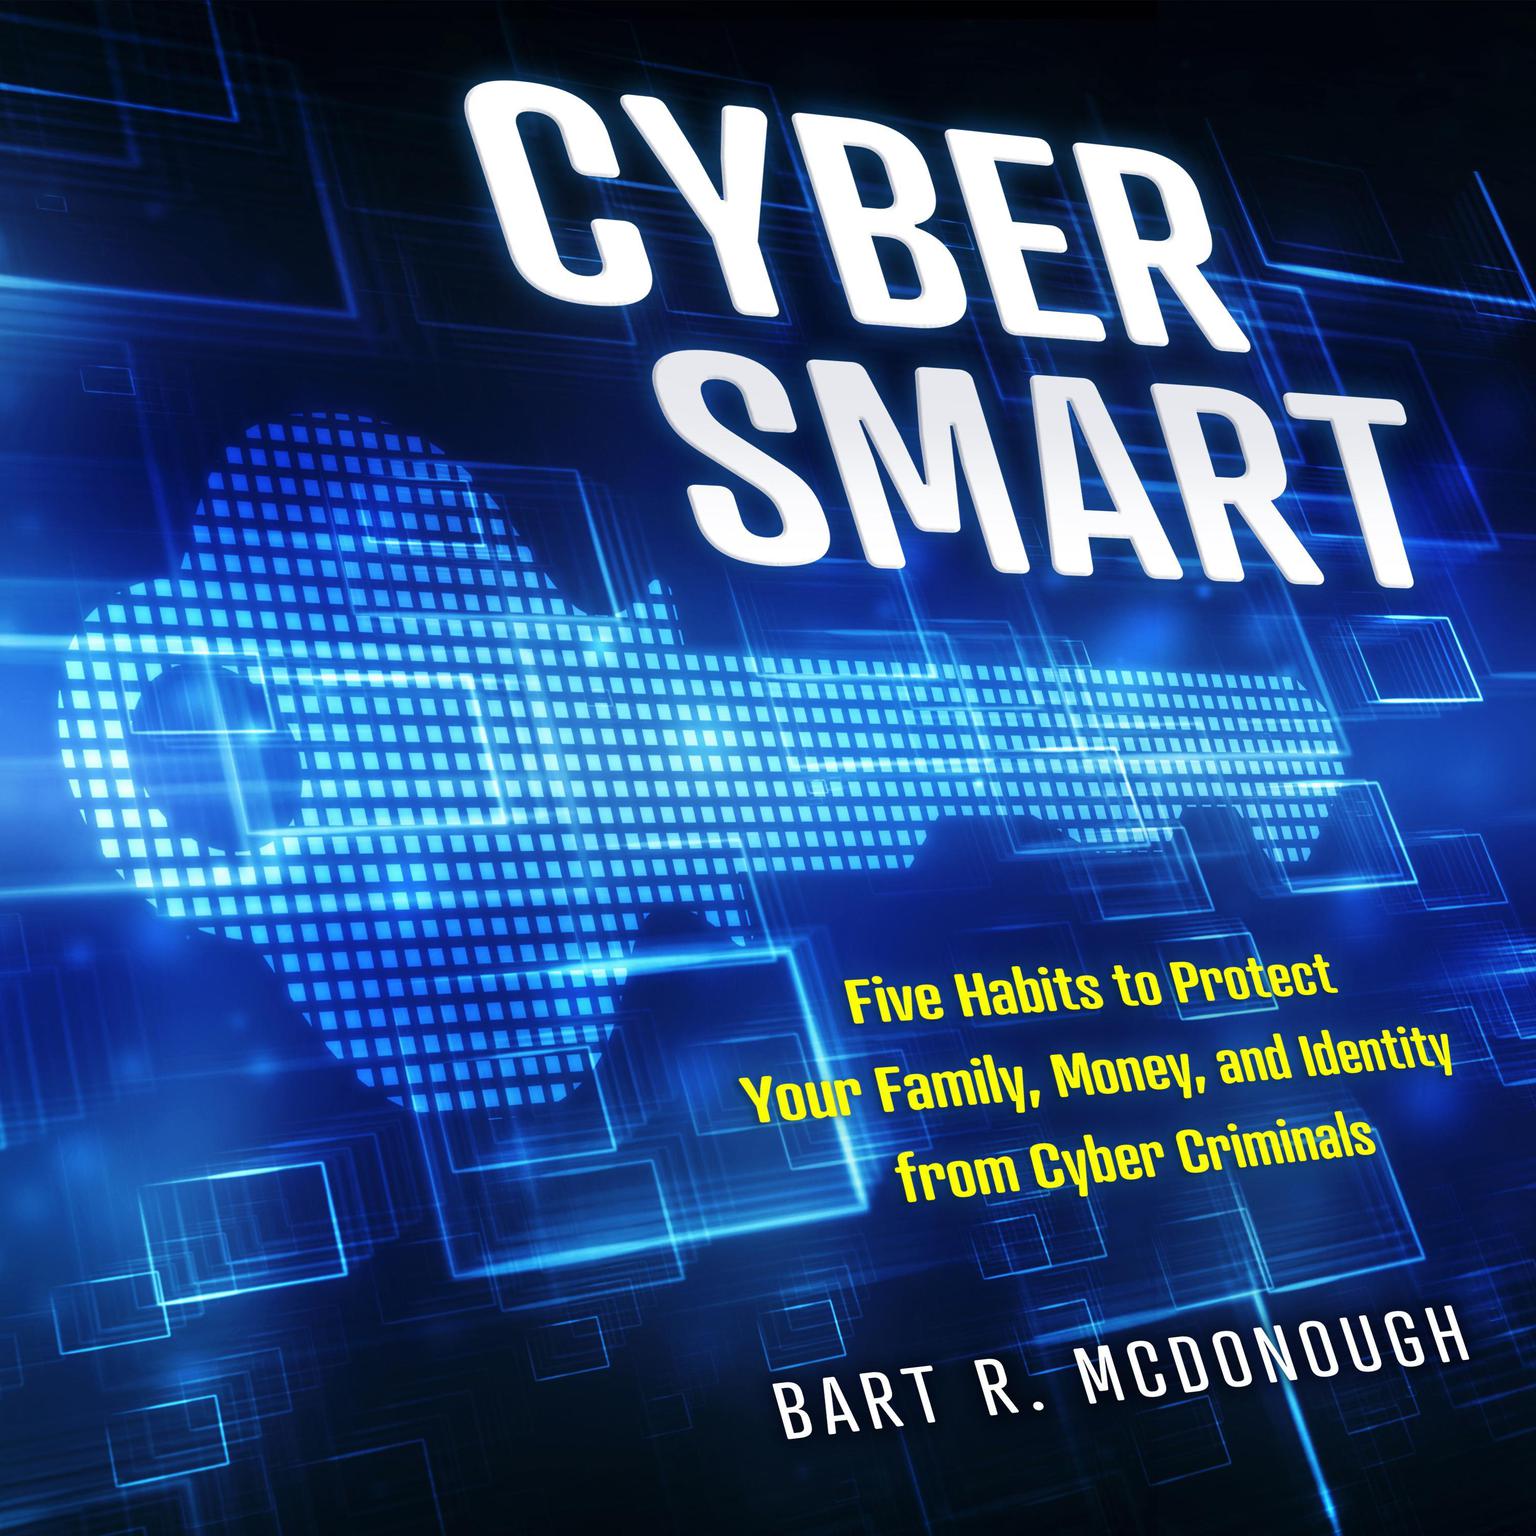 Cyber Smart: Five Habits to Protect Your Family, Money, and Identity from Cyber Criminals Audiobook, by Bart R. McDonough